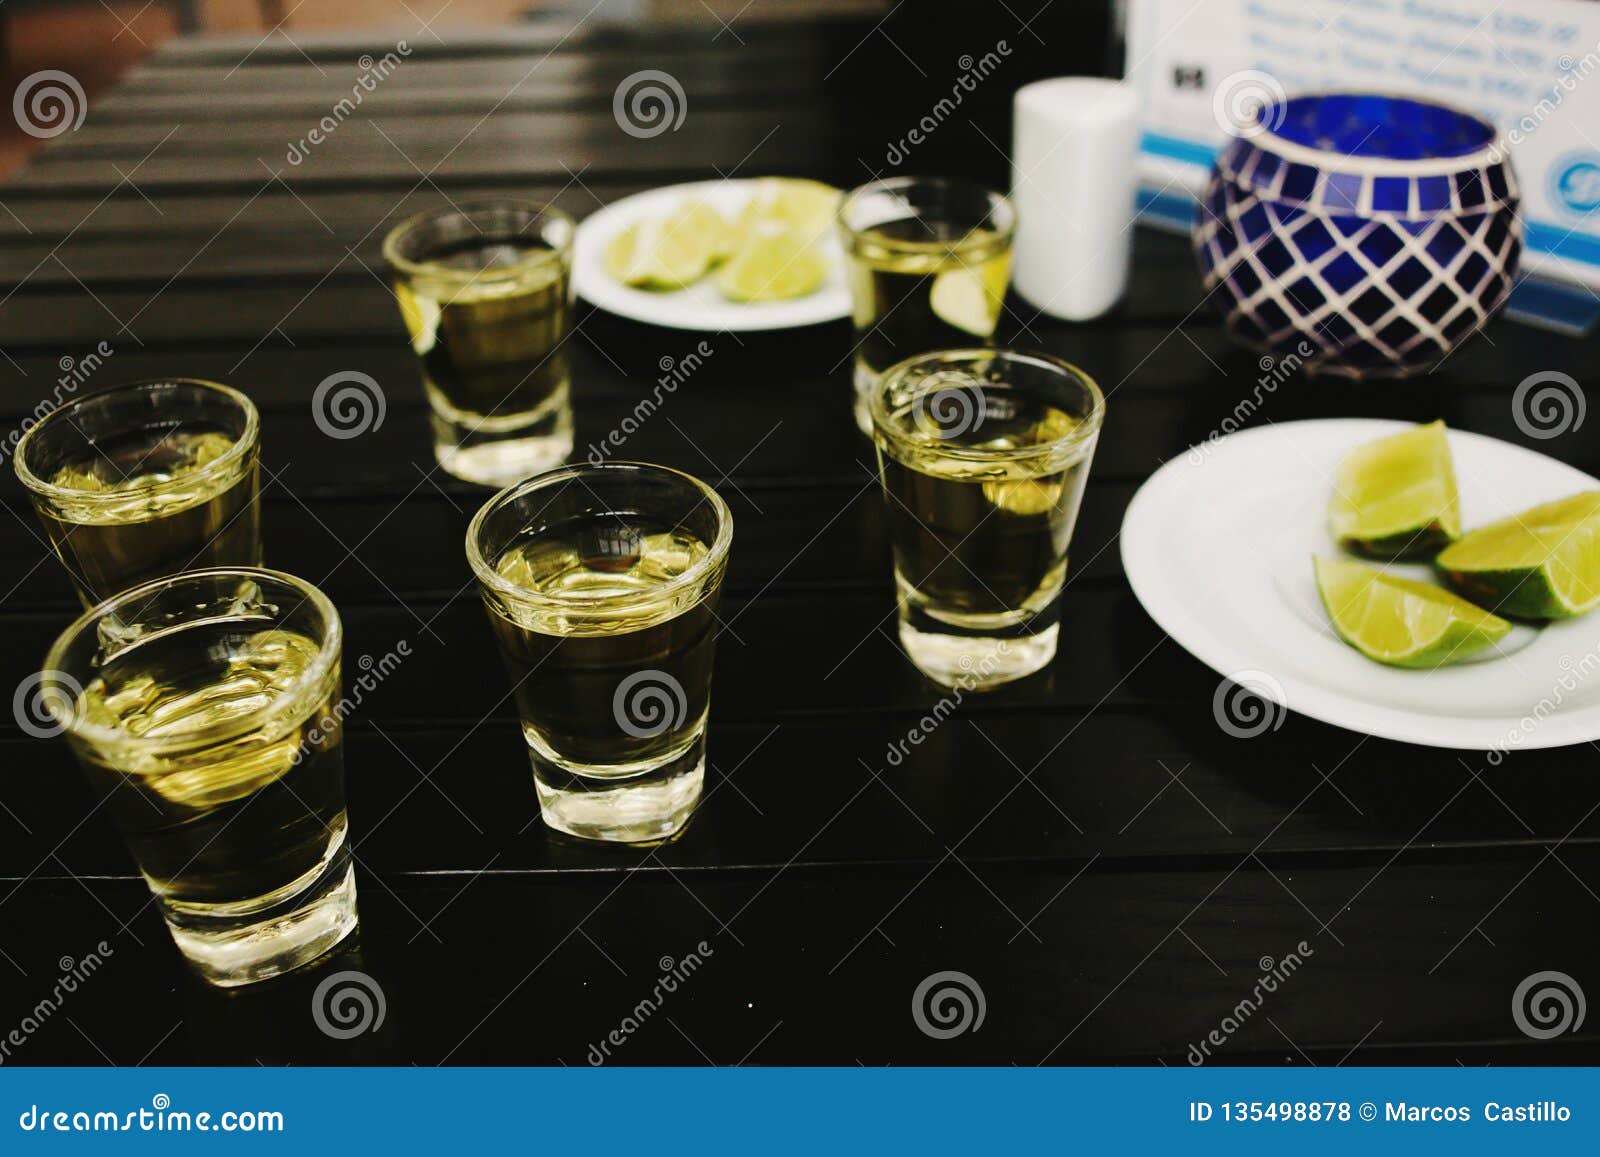 tequila shots mexican drink in mexico city